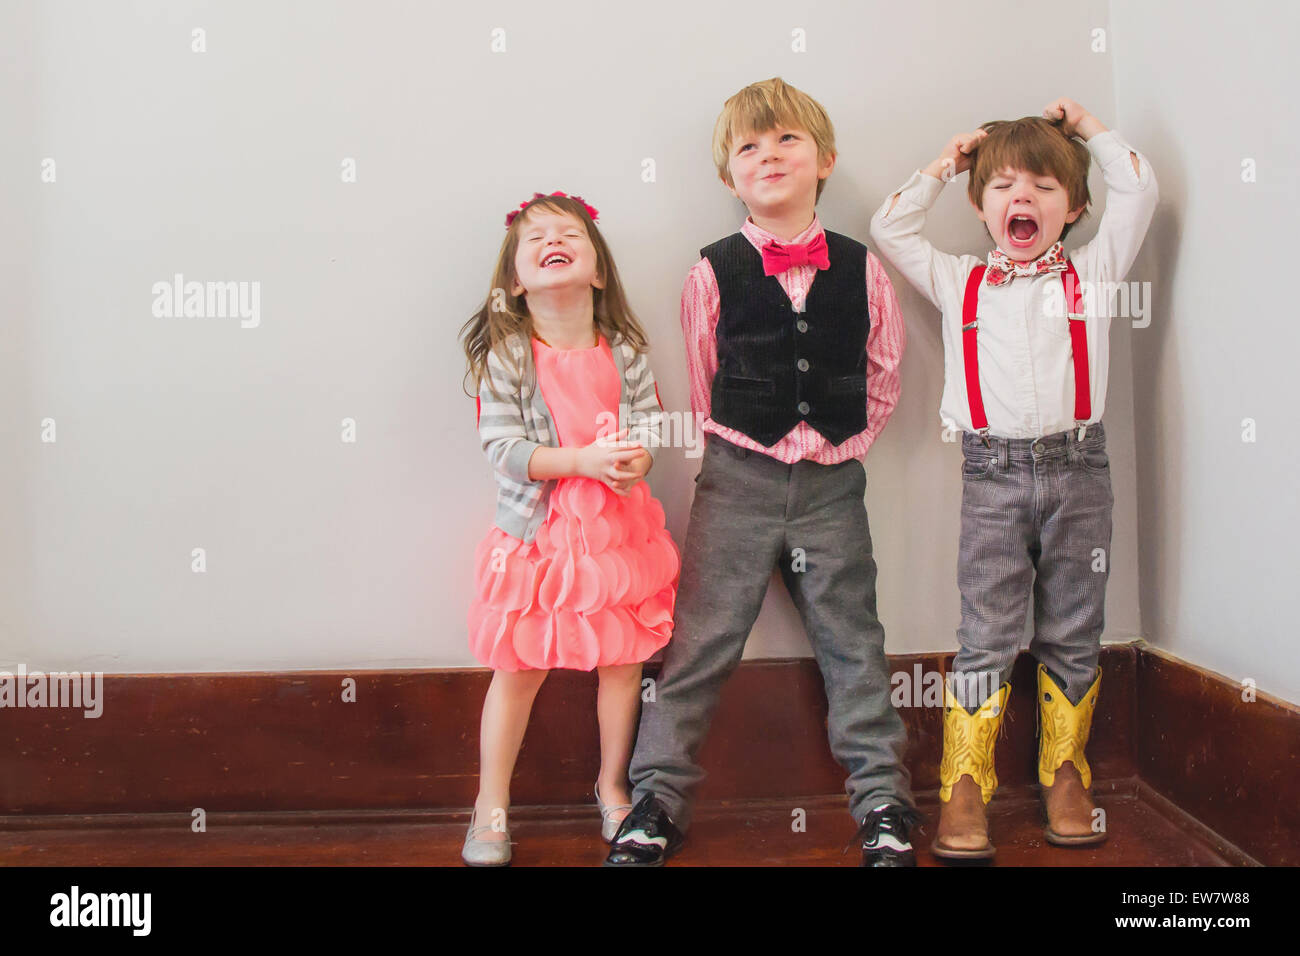 Three children dressed up in smart clothing messing about Stock Photo